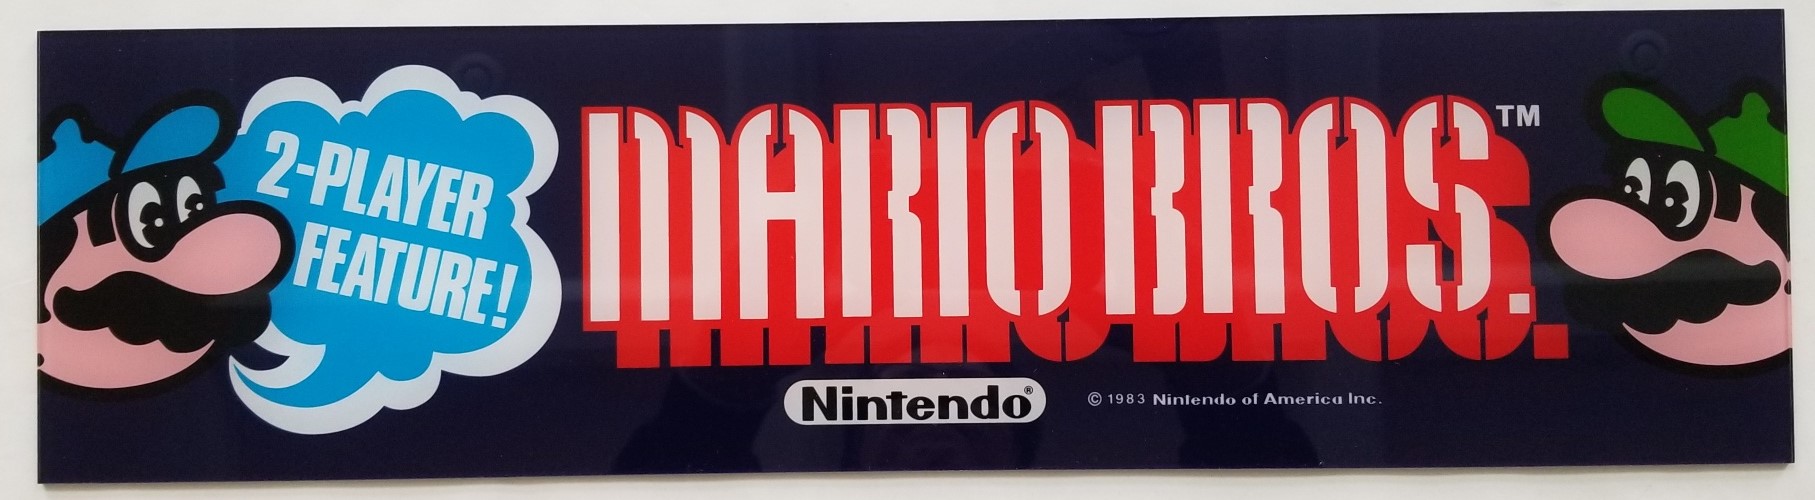 MARIO BROTHERS NARROW BODY MARQUEE SCREEN PRINTED! 